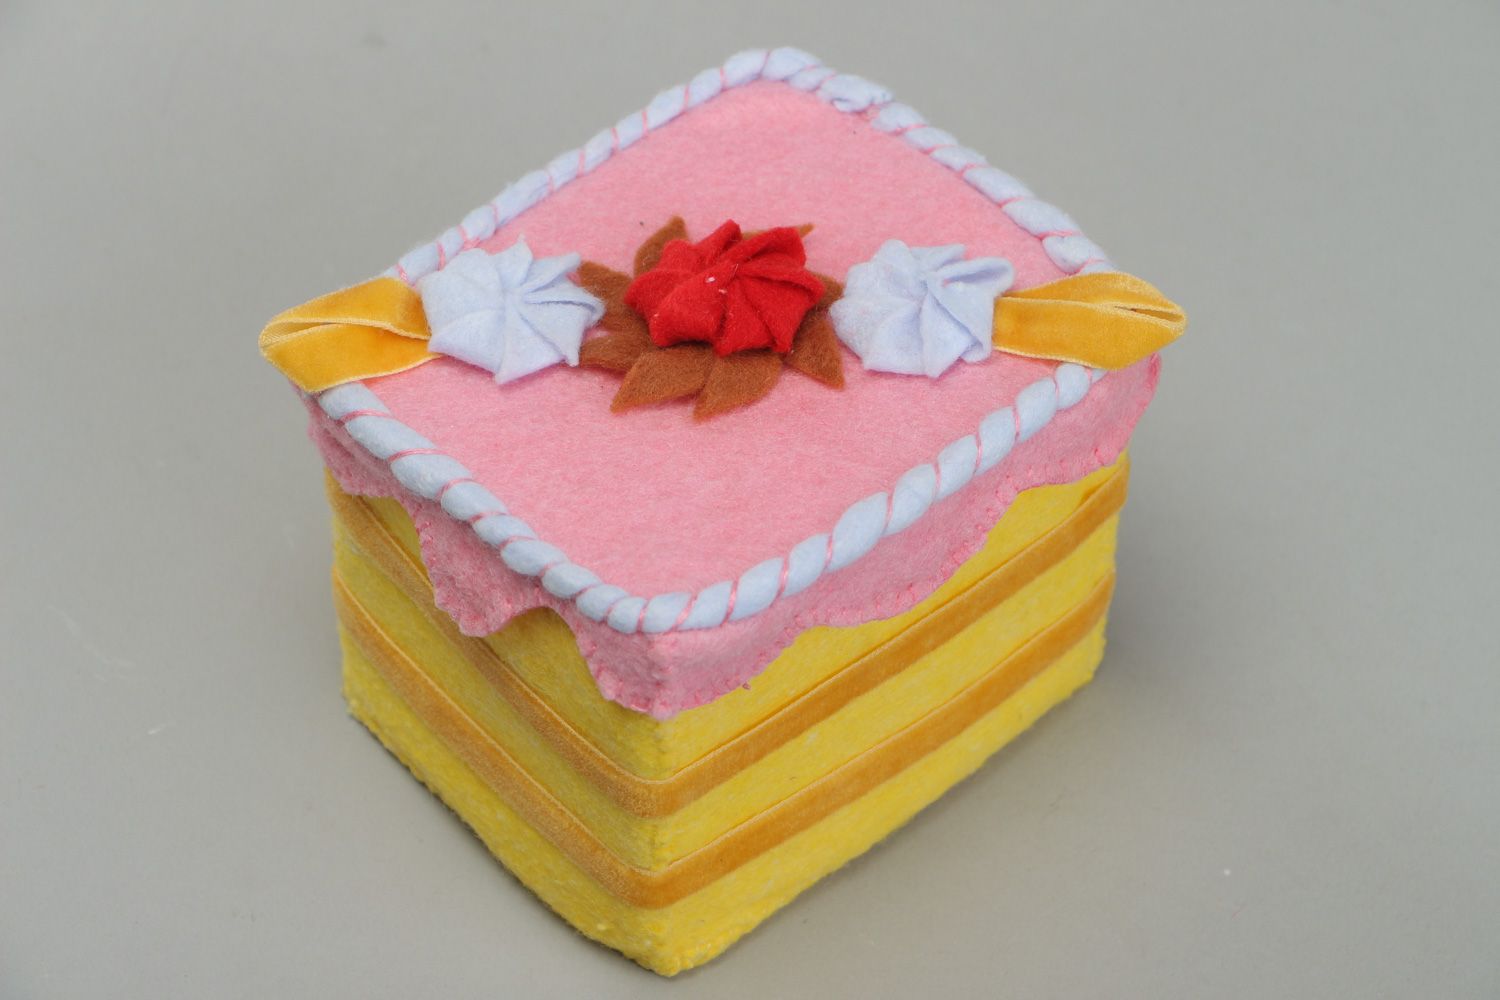 Handmade children's colorful jewelry box made of felt in the shape of a cake photo 2